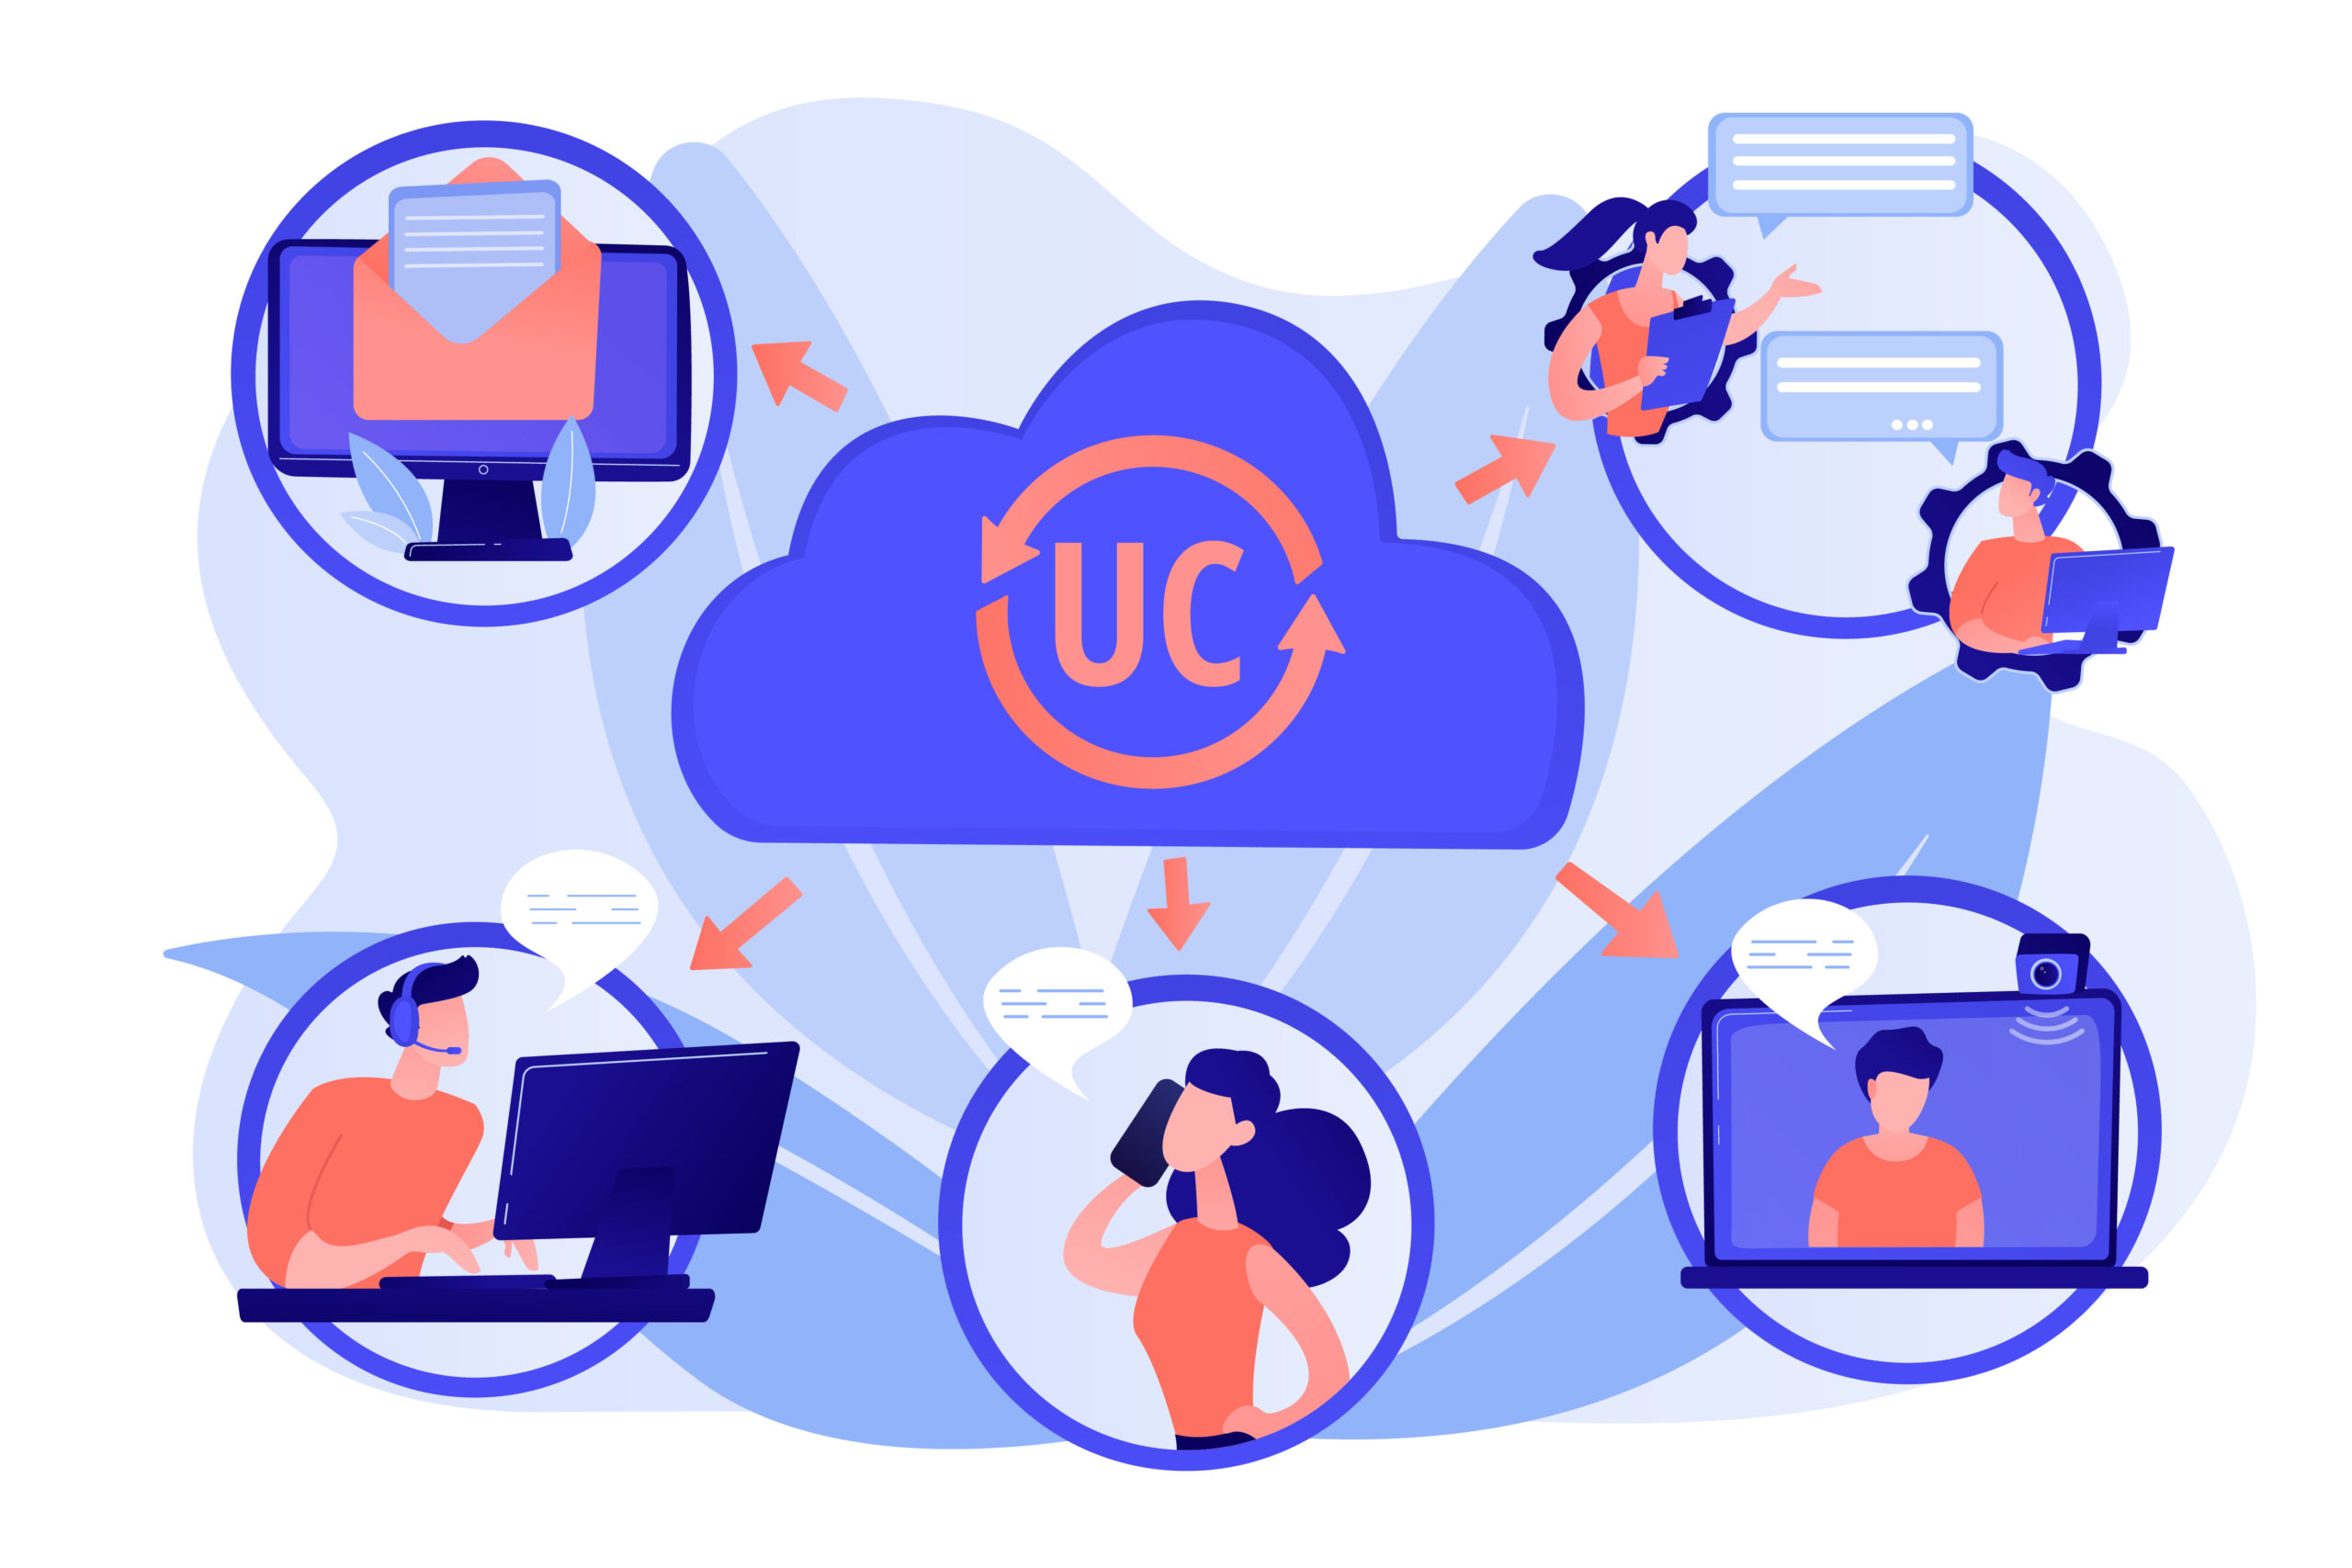 Unified Communications & Collaboration (UCC)